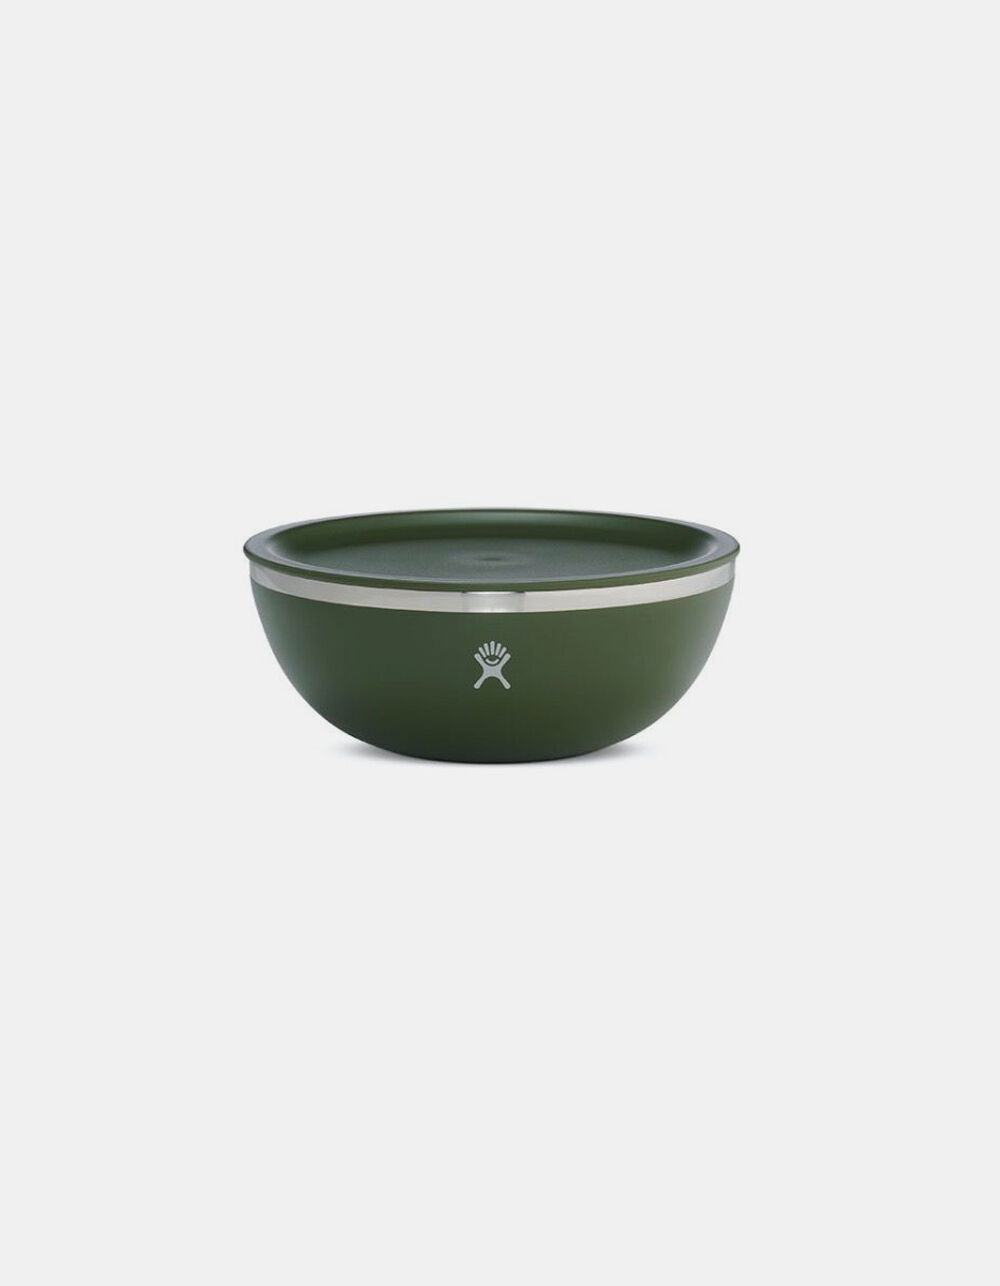 Hydro Flask Outdoor Bowl - Bowl, Buy online